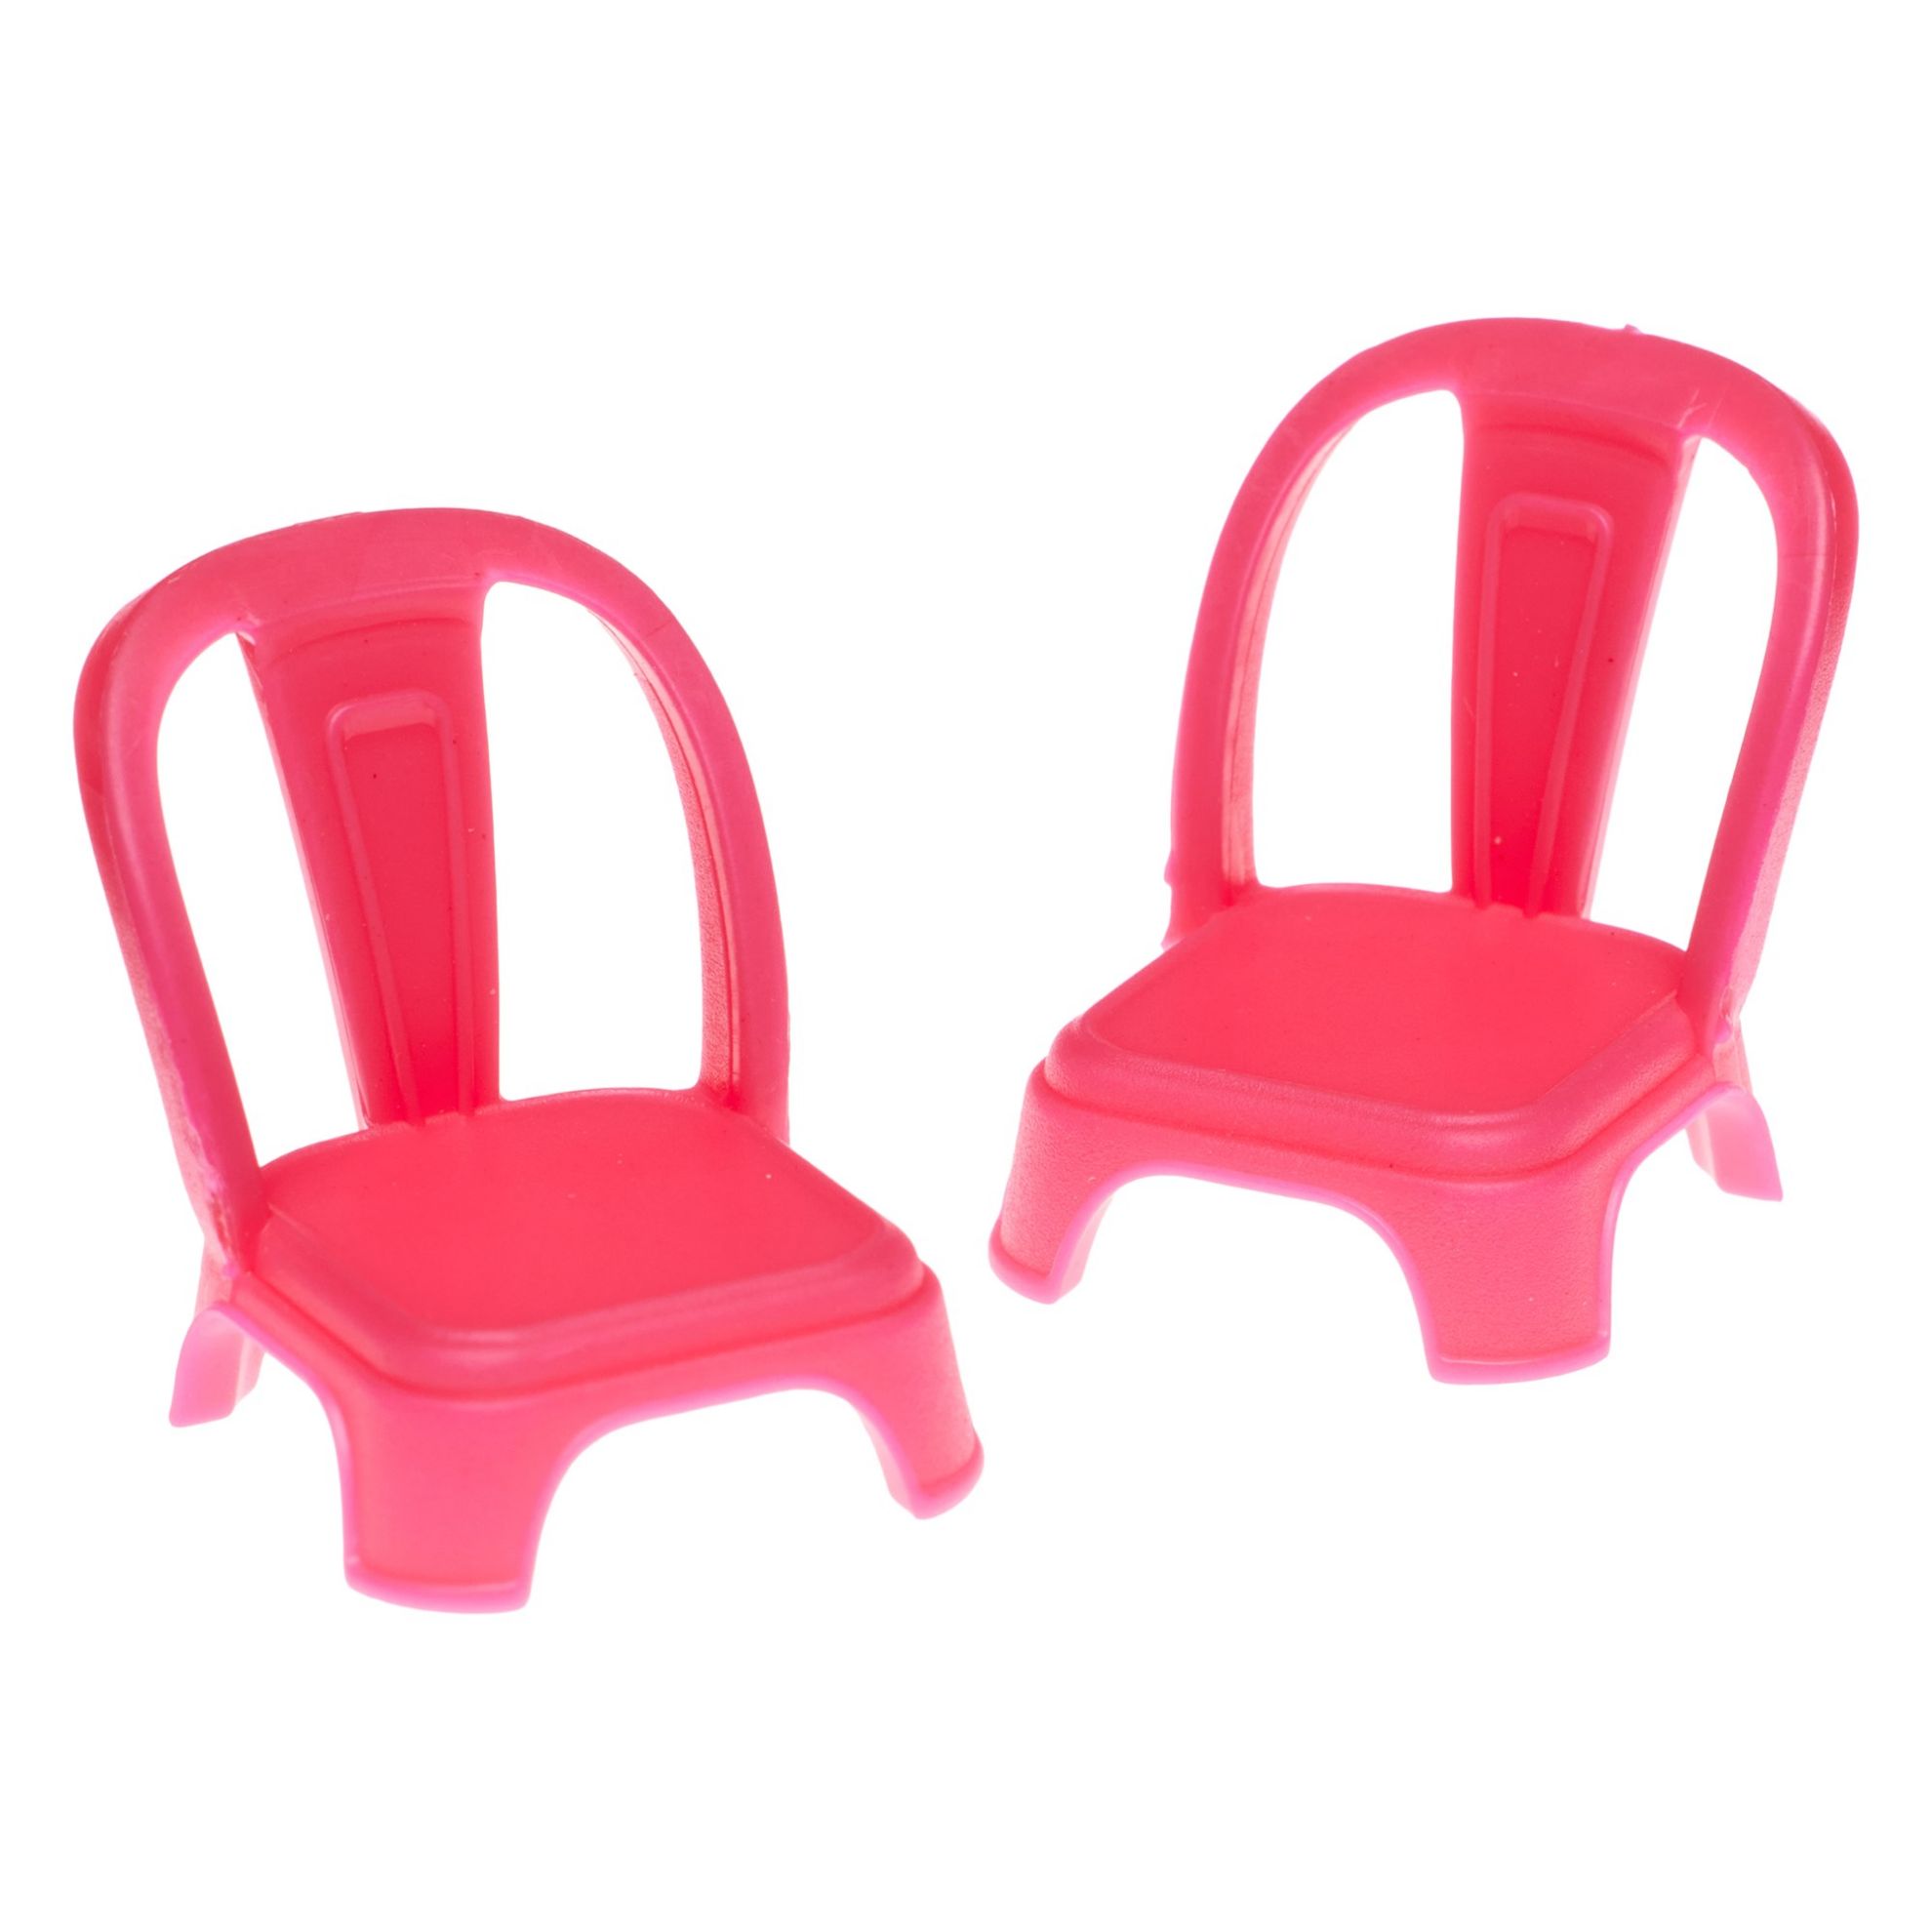 Spare Parts - MITH Croissant Cafe - Pink Chairs